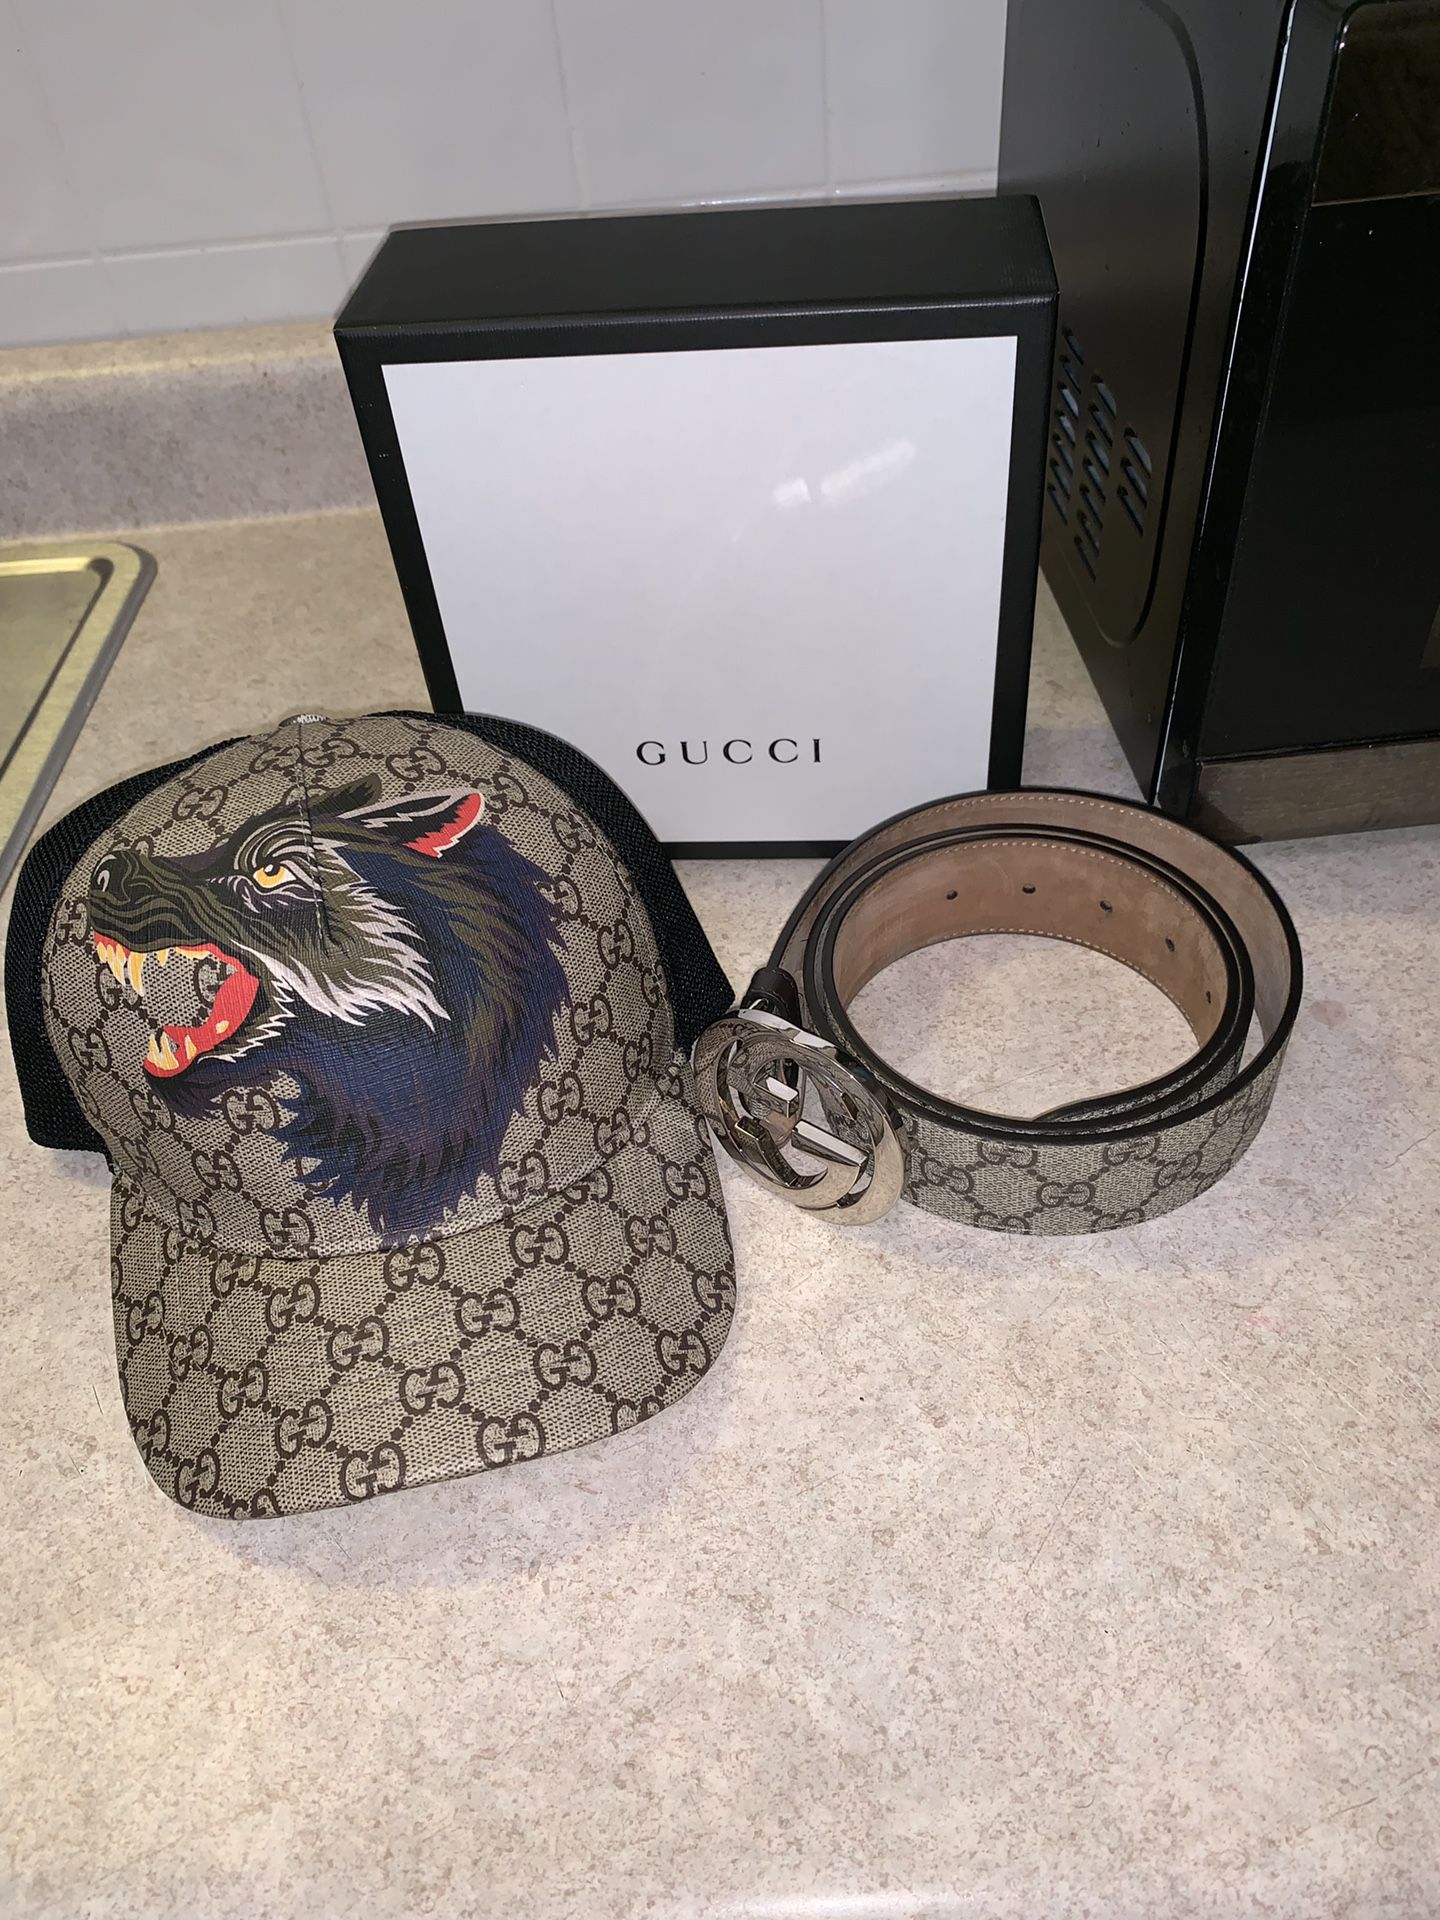 Hat sold . Gucci belt still available